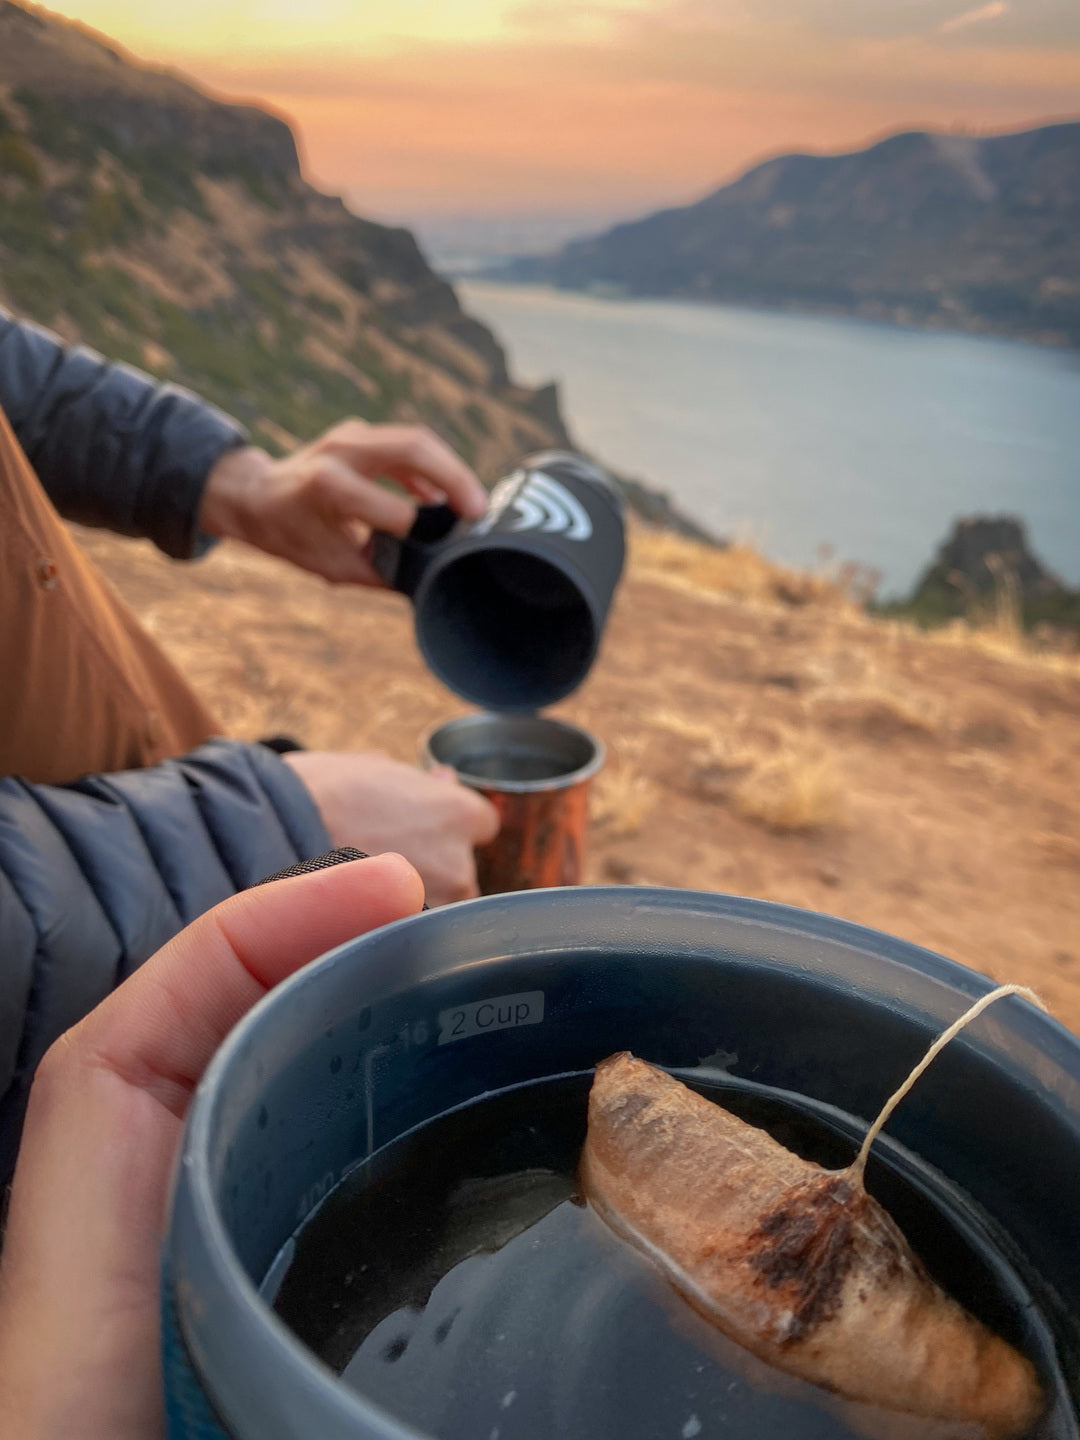 Wildland Coffee bag in cup overlooking lake at sunrise. My friend and I took two of these up a mountain for sunrise and were really worried it wouldn't be "coffee" enough just being steeped. It was perfect. So much easier than carrying a french press!